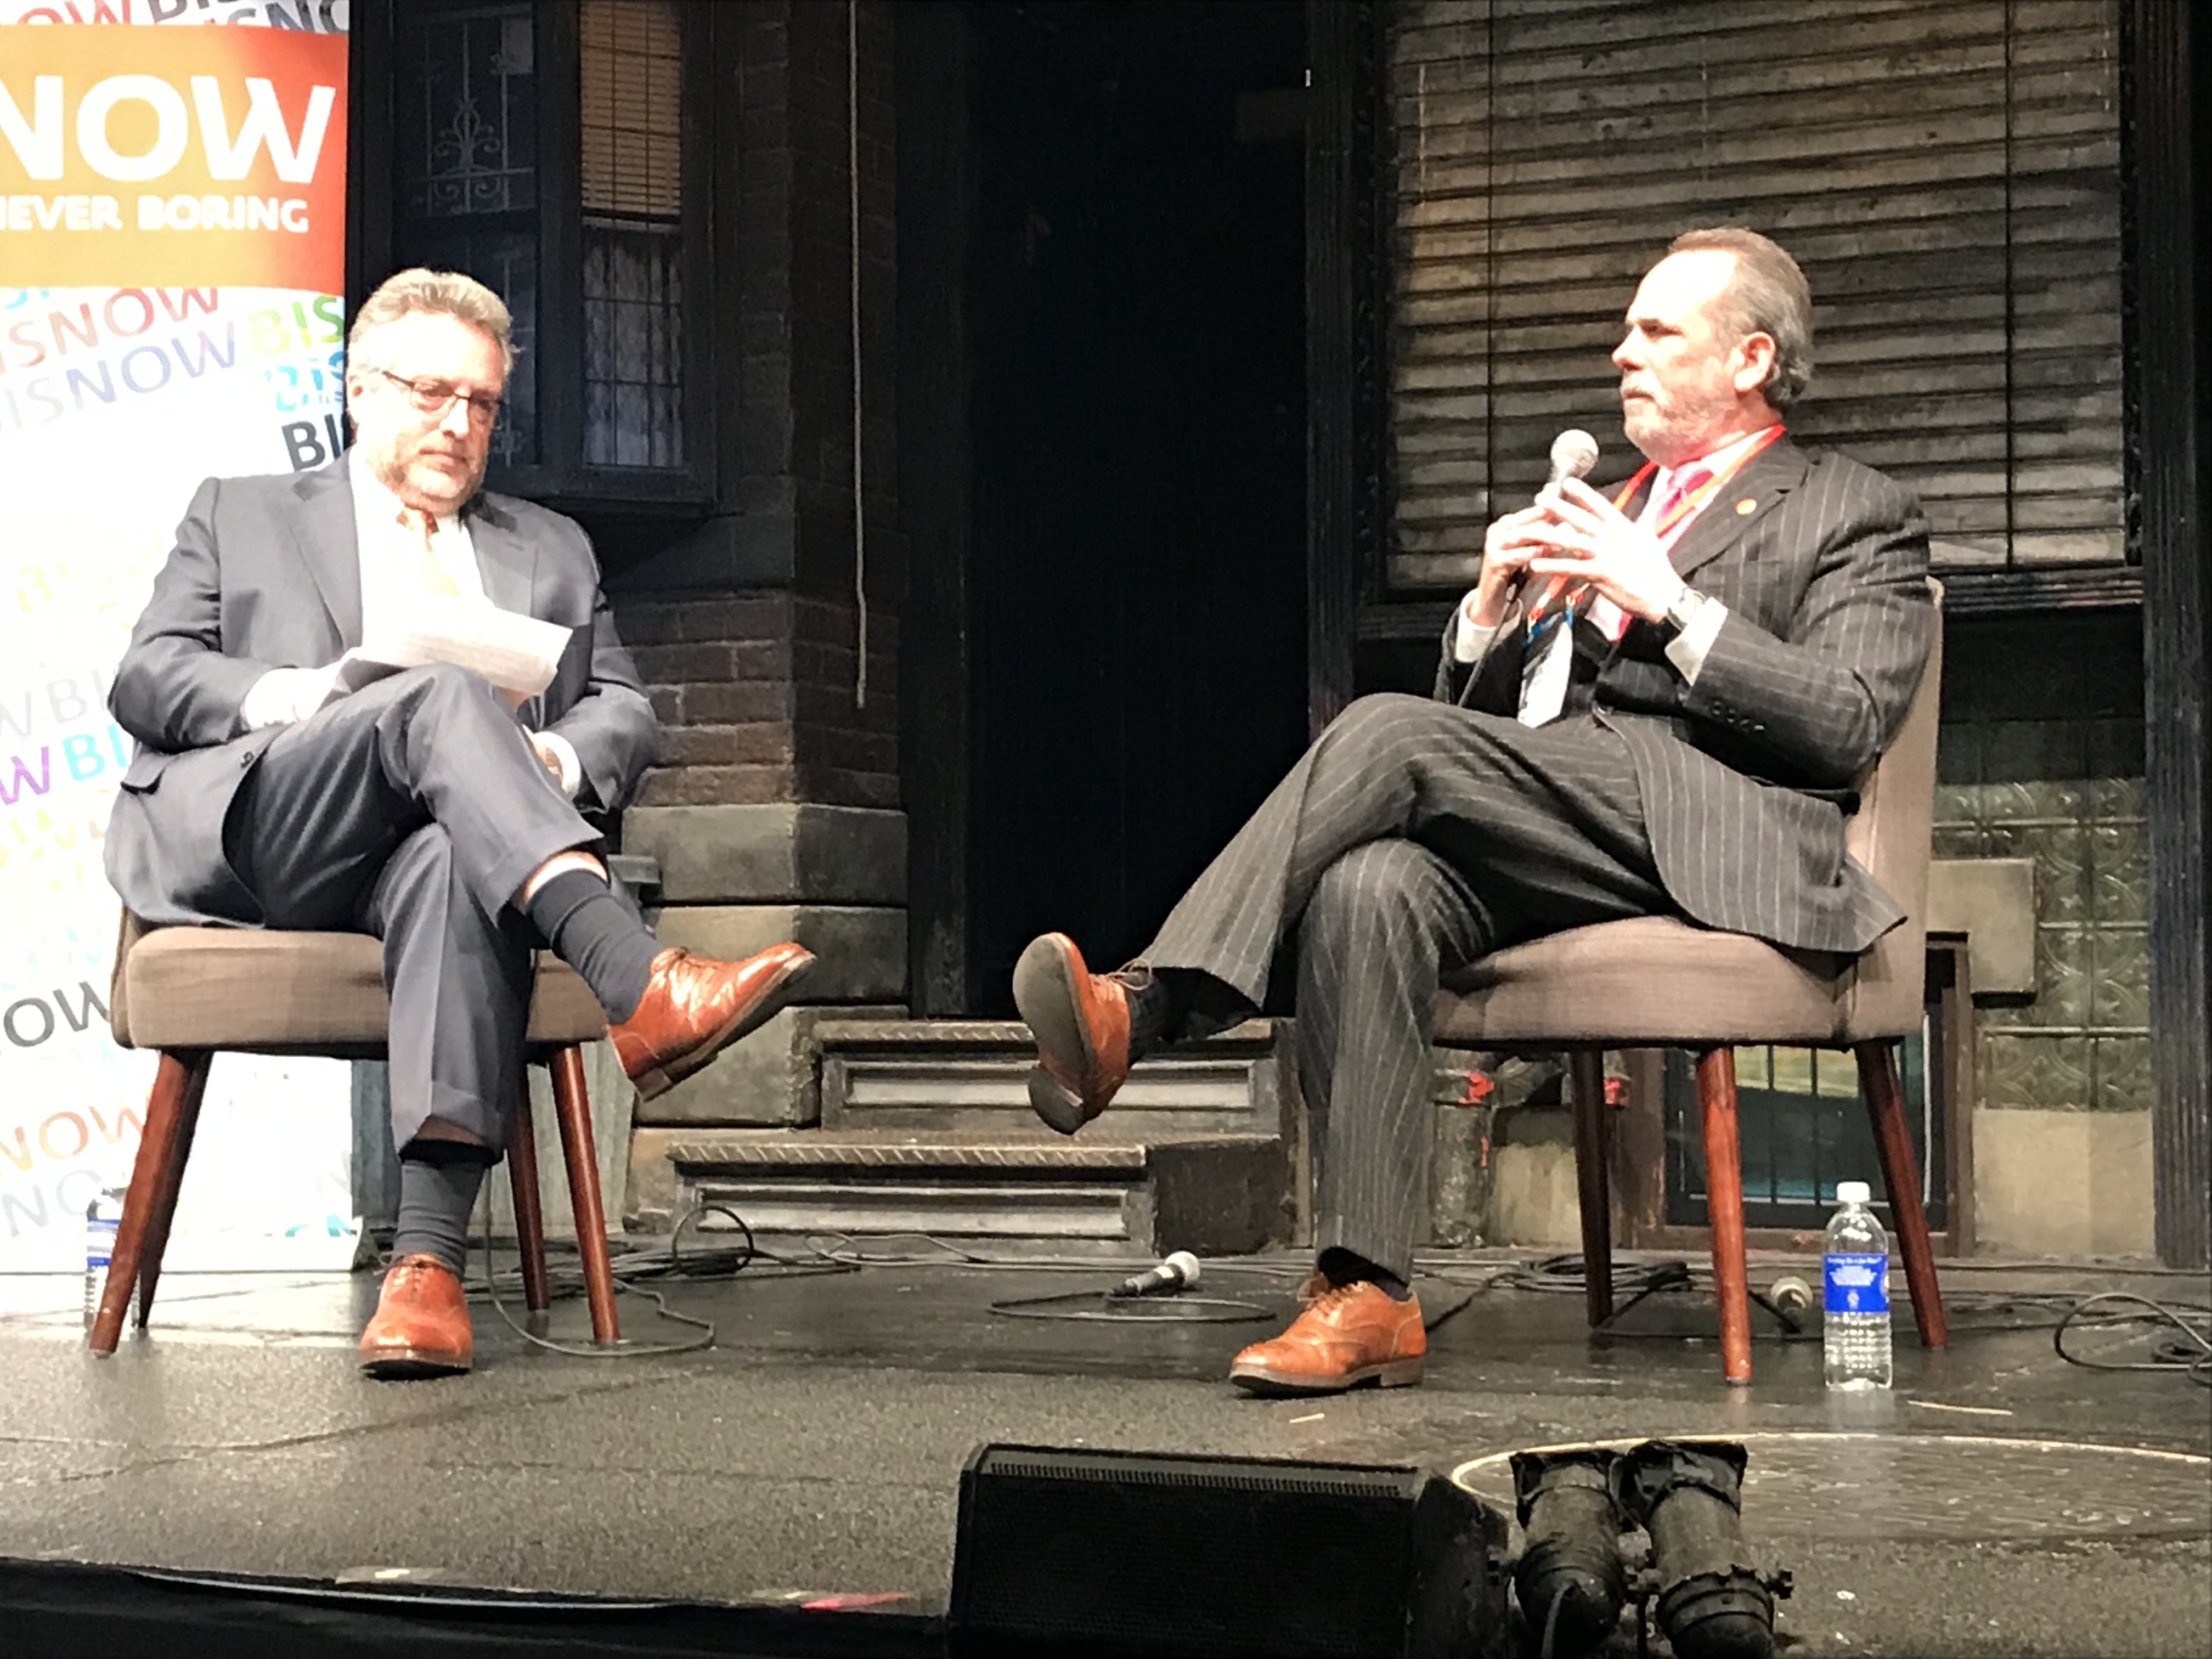 Trump Hotels CEO Eric Danziger with Daniel Lesser at Bisnow